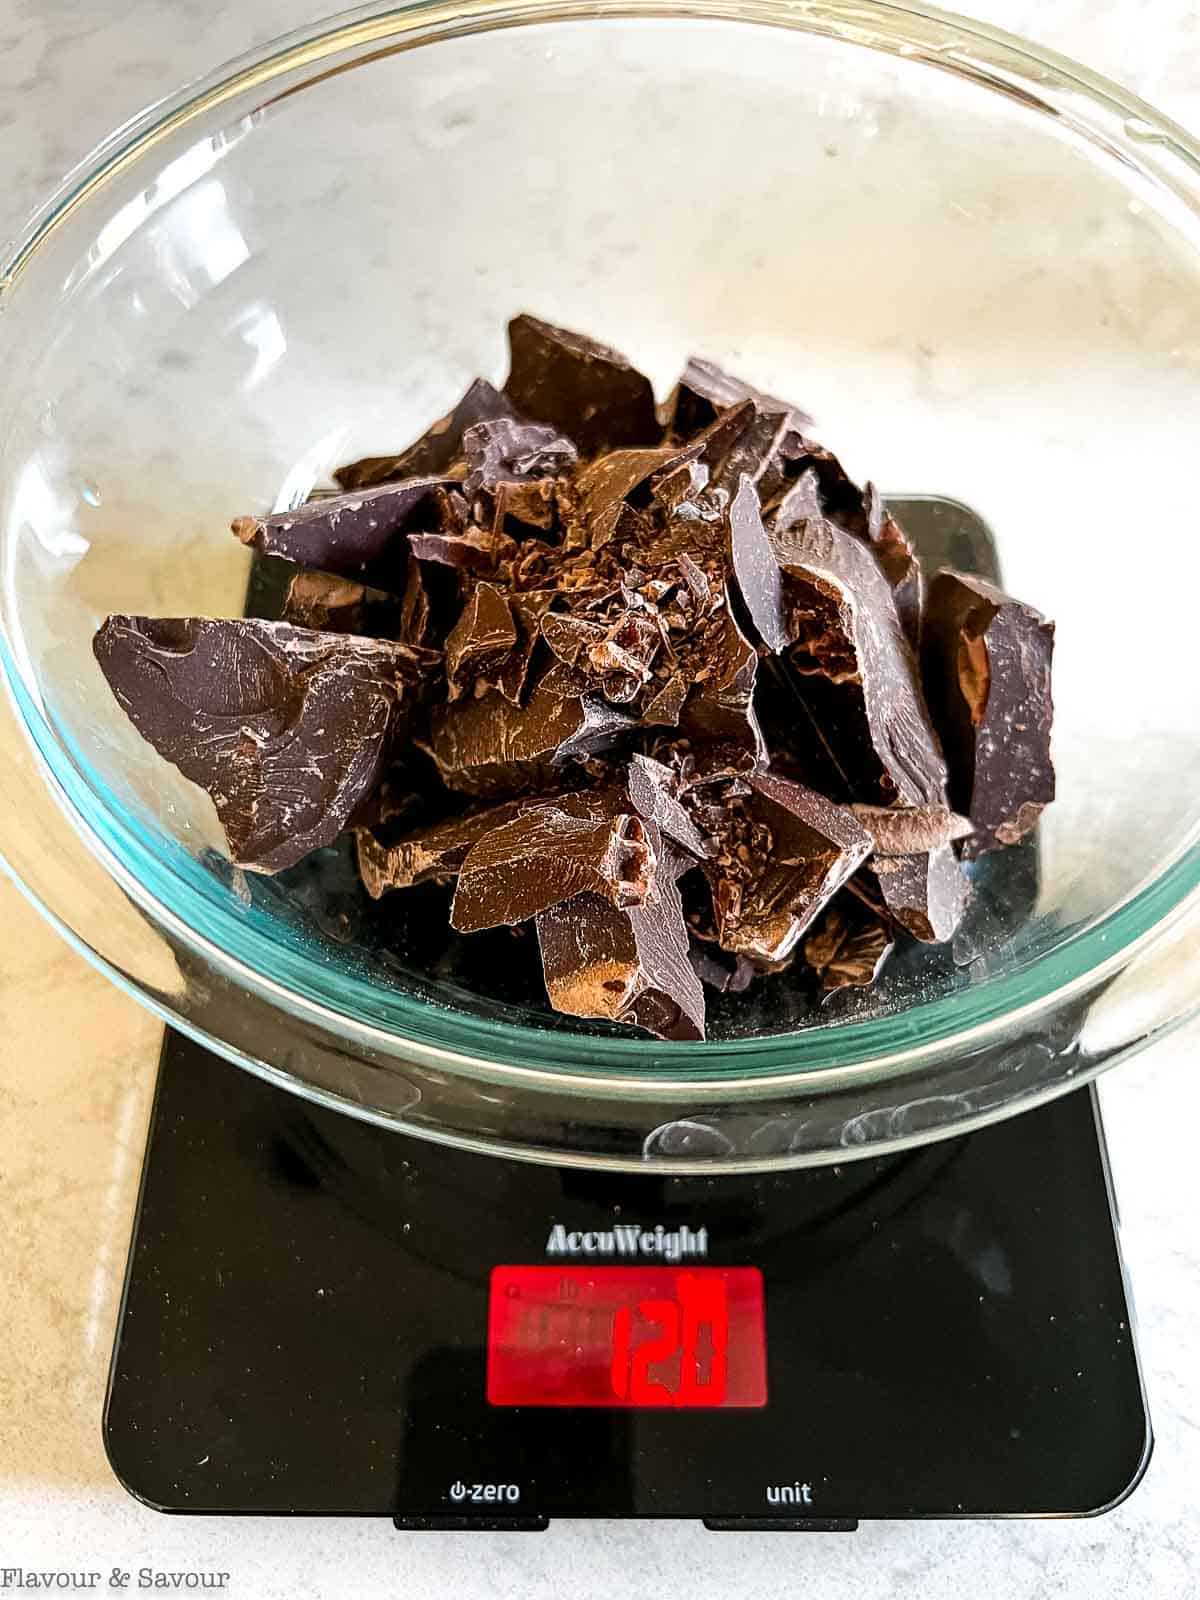 Chopped chocolate in a glass bowl on a digital scale showing 12.0 oz.